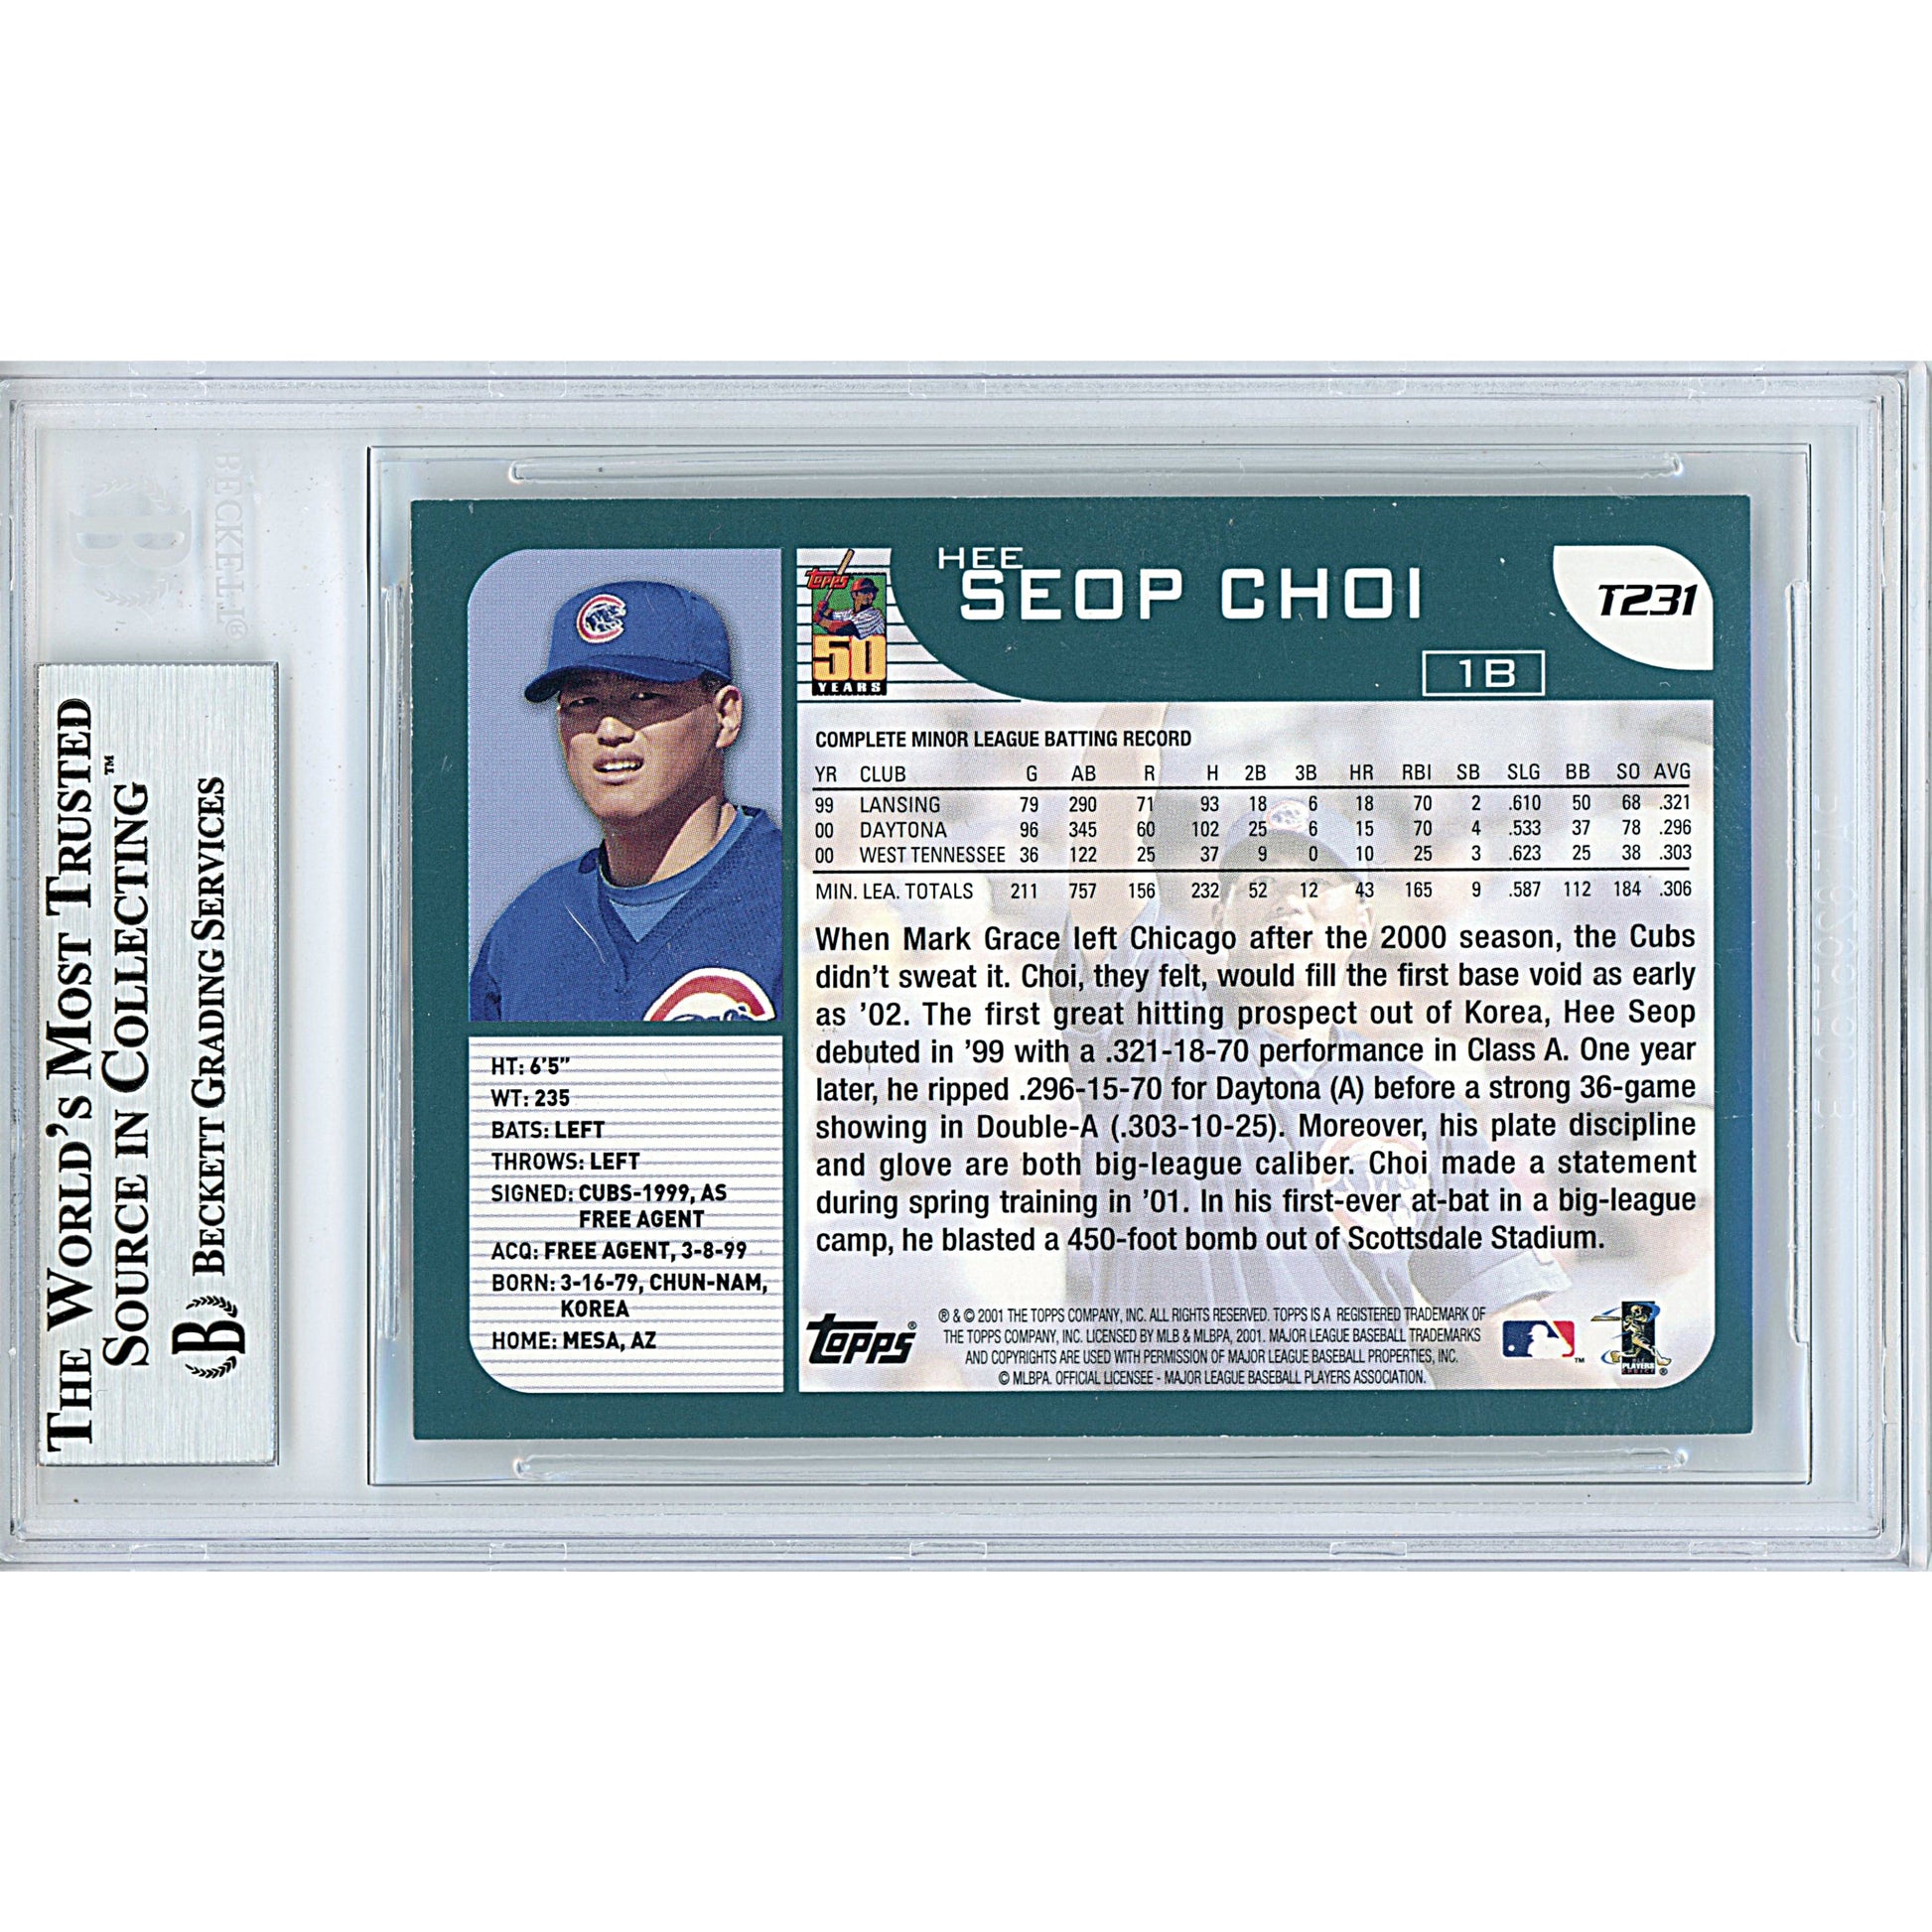 Baseballs- Autographed- Hee Seop Choi Signed Chicago Cubs 2001 Topps Traded Baseball Card Beckett BAS Slabbed 00013694820 - 102